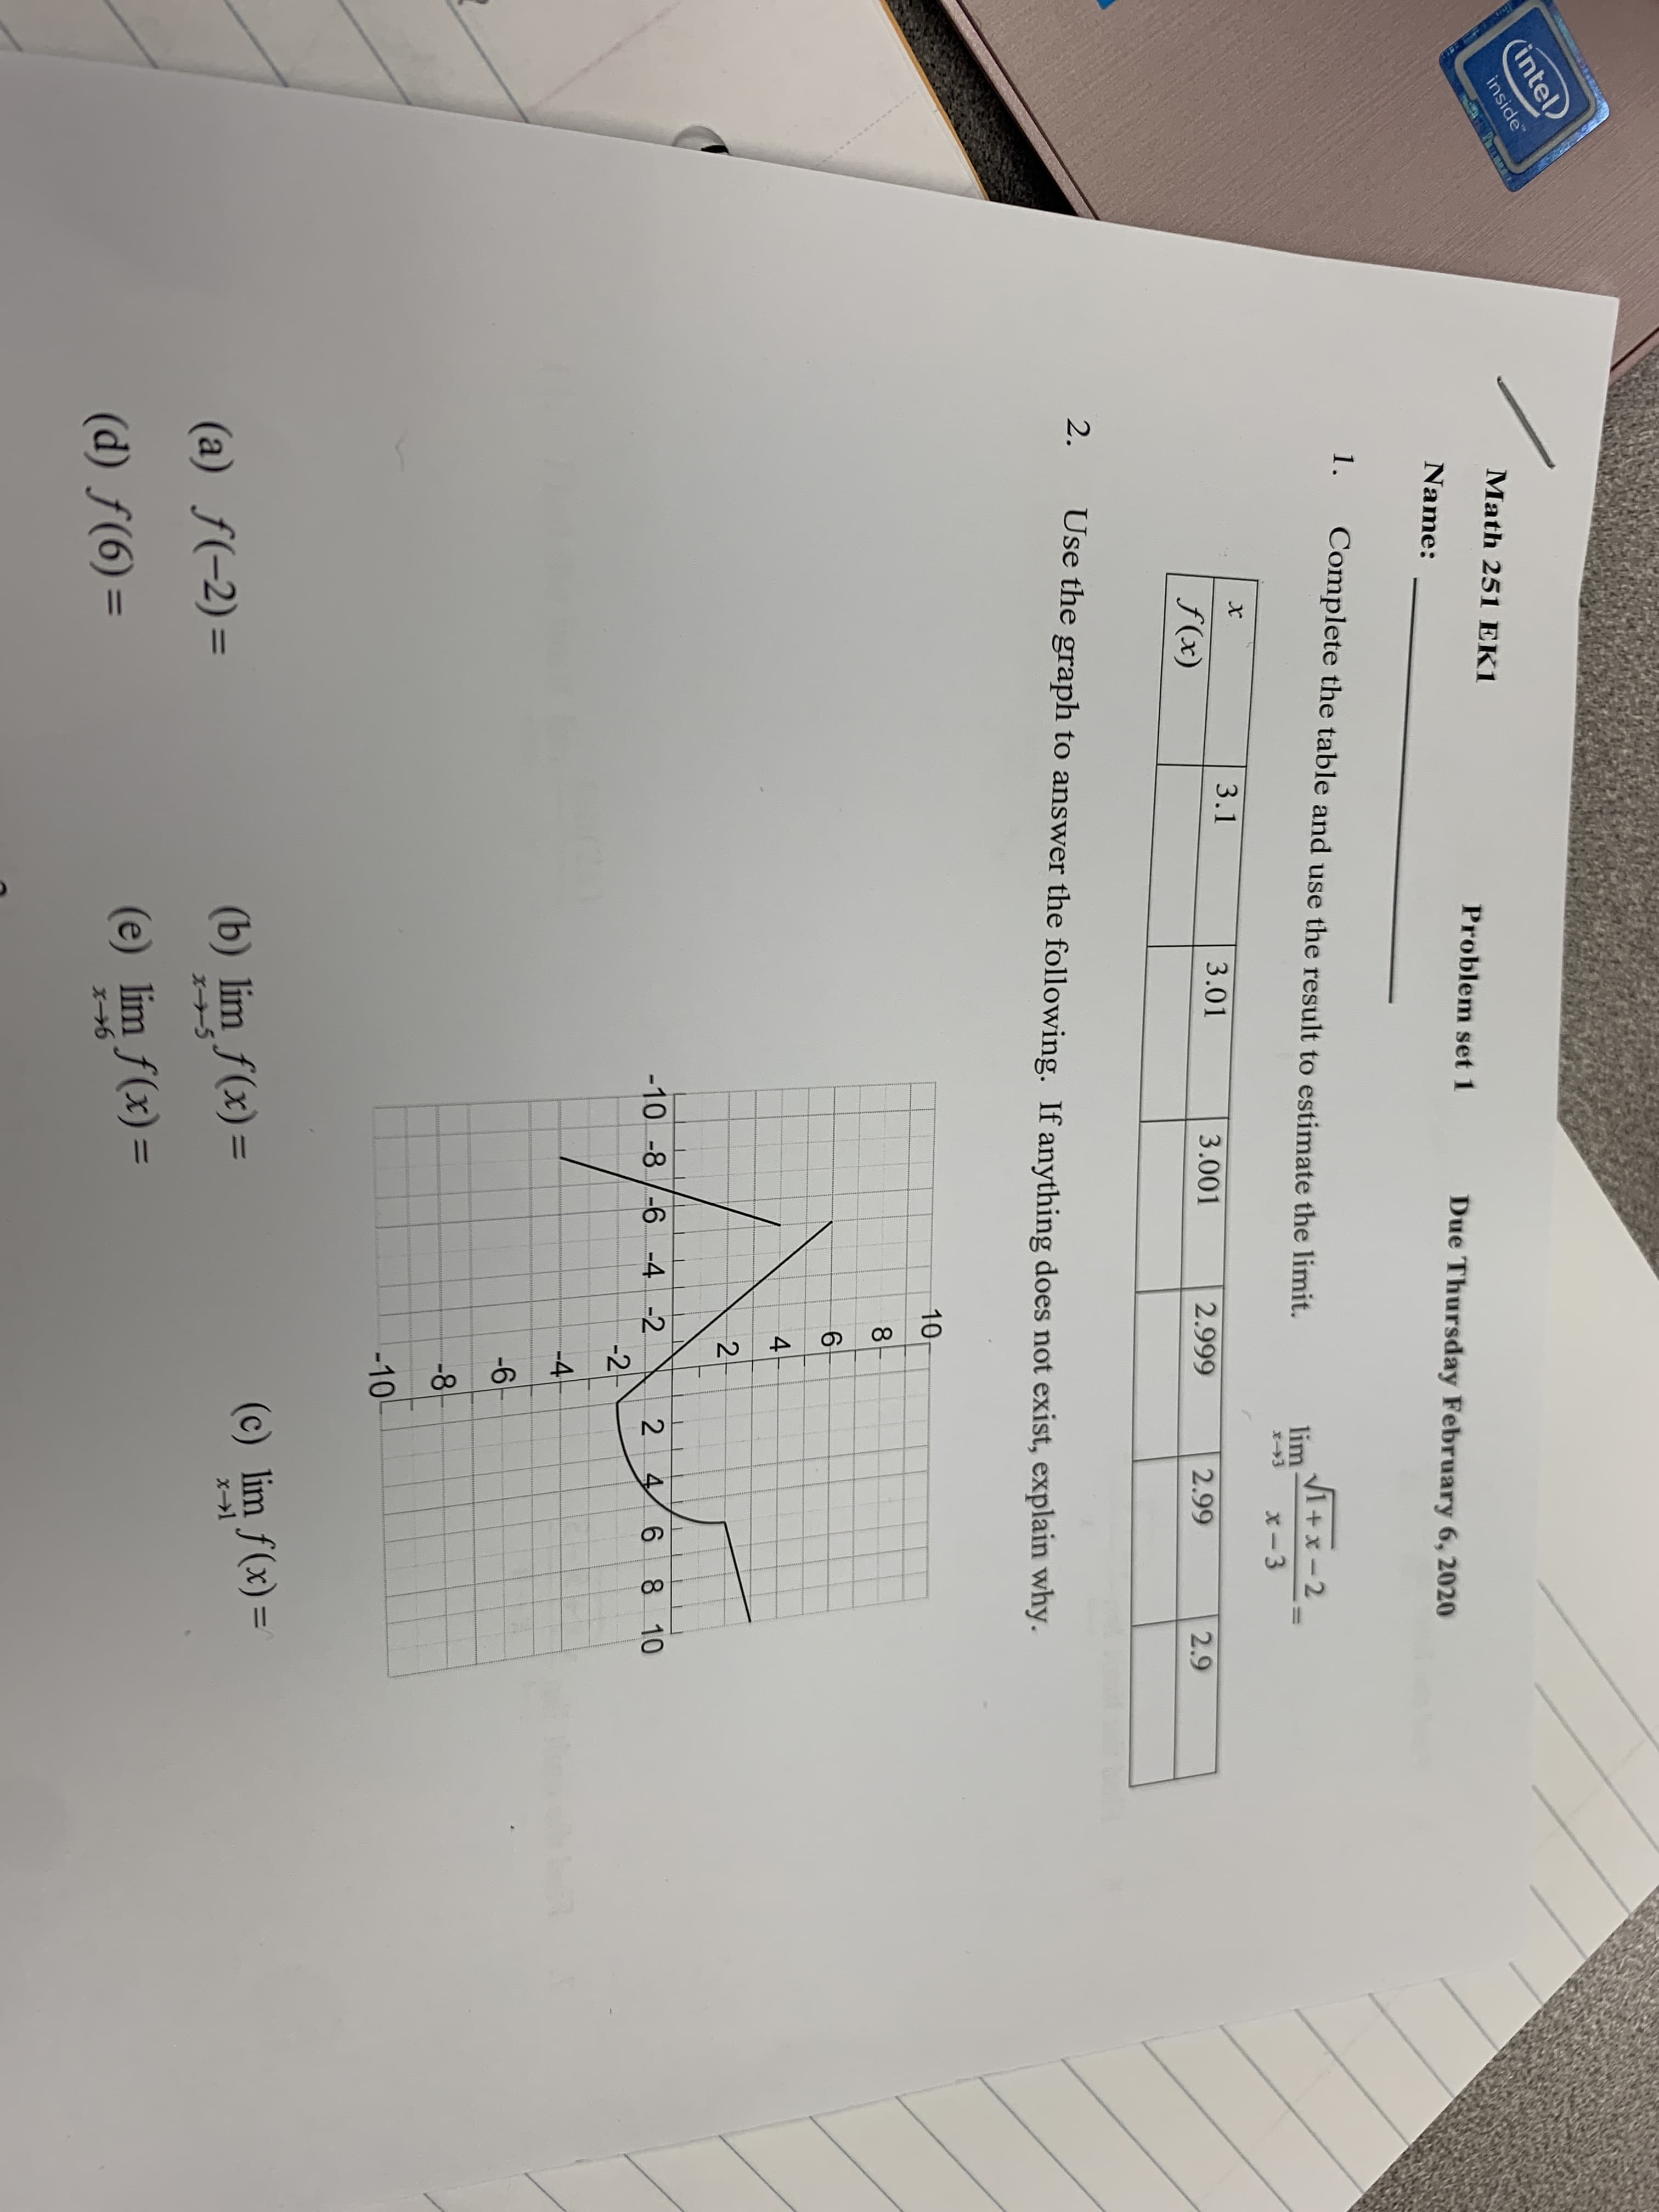 4.
2.
intel)
inside"
Math 251 EKI
Problem set 1
Name:
Due Thursday February 6, 2020
1.
Complete the table and use the result to estimate the limit.
V1+x-2
lim
x-3
3.1
f(x)
3.01
3.001
2.999
2.99
2.9
2.
Use the graph to answer the following. If anything does not exist, explain why.
10
6.
-10 -8 /-6 -4 -2
4 6 8 10
2.
-2
-4
-6
-8
-10
(a) f(-2)=
(b) lim f(x) =
(c) lim f(x) =
%3D
%3D
(d) ƒ(6) =
(e) lim f(x) =
%3D
%3D
